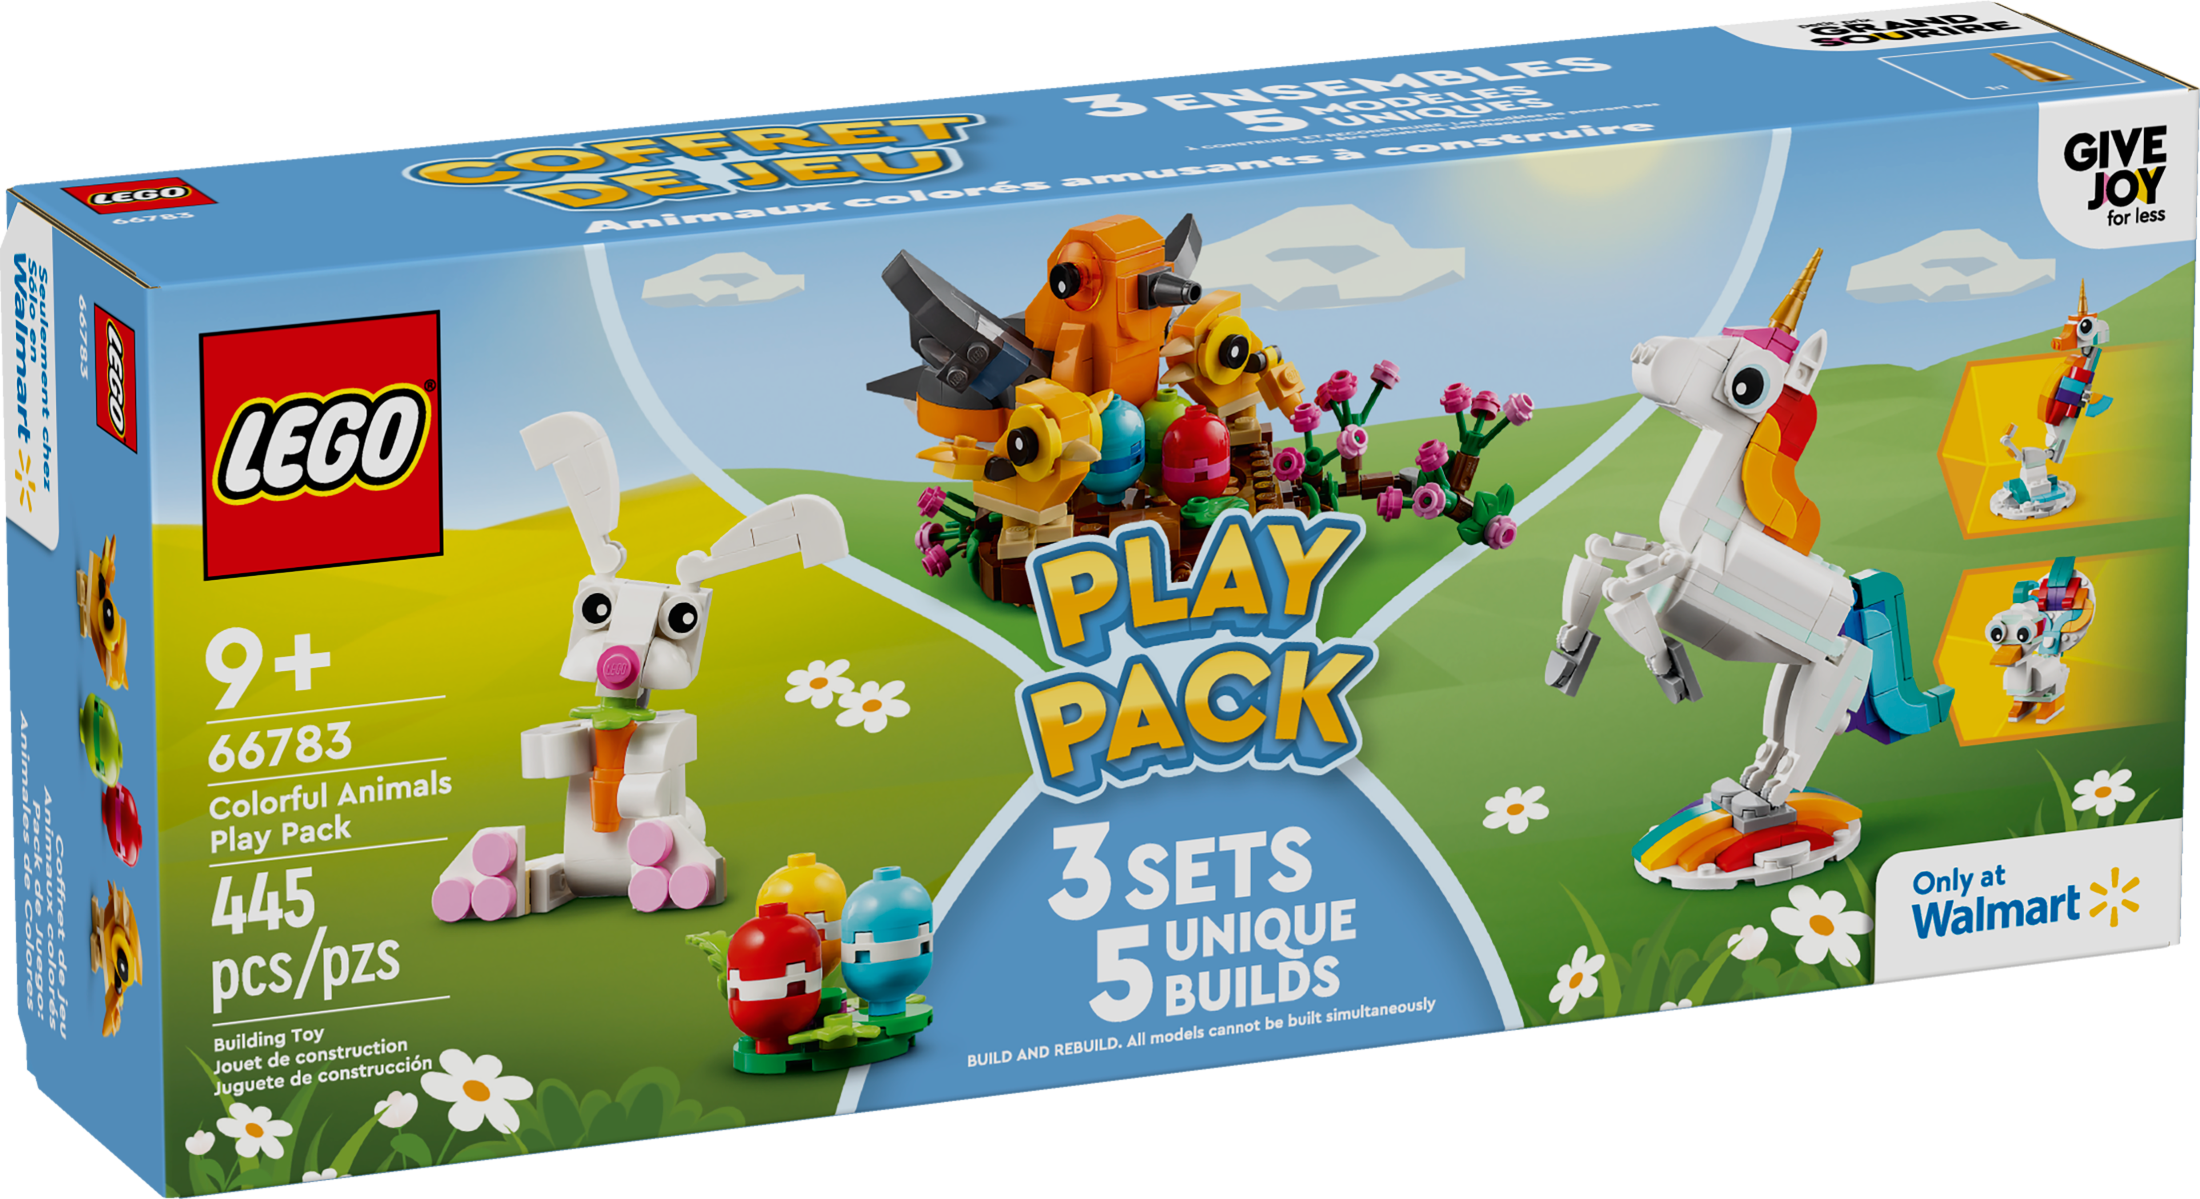 LEGO Colorful Animals Play Pack, 5 Adorable Animal Builds in 1 Box: Bunny Toy, Unicorn Toy, Seahorse Toy, Peacock Toy, and Birds in a Nest, Birthday Gift Idea for Animal Lovers, 66783 - image 2 of 8